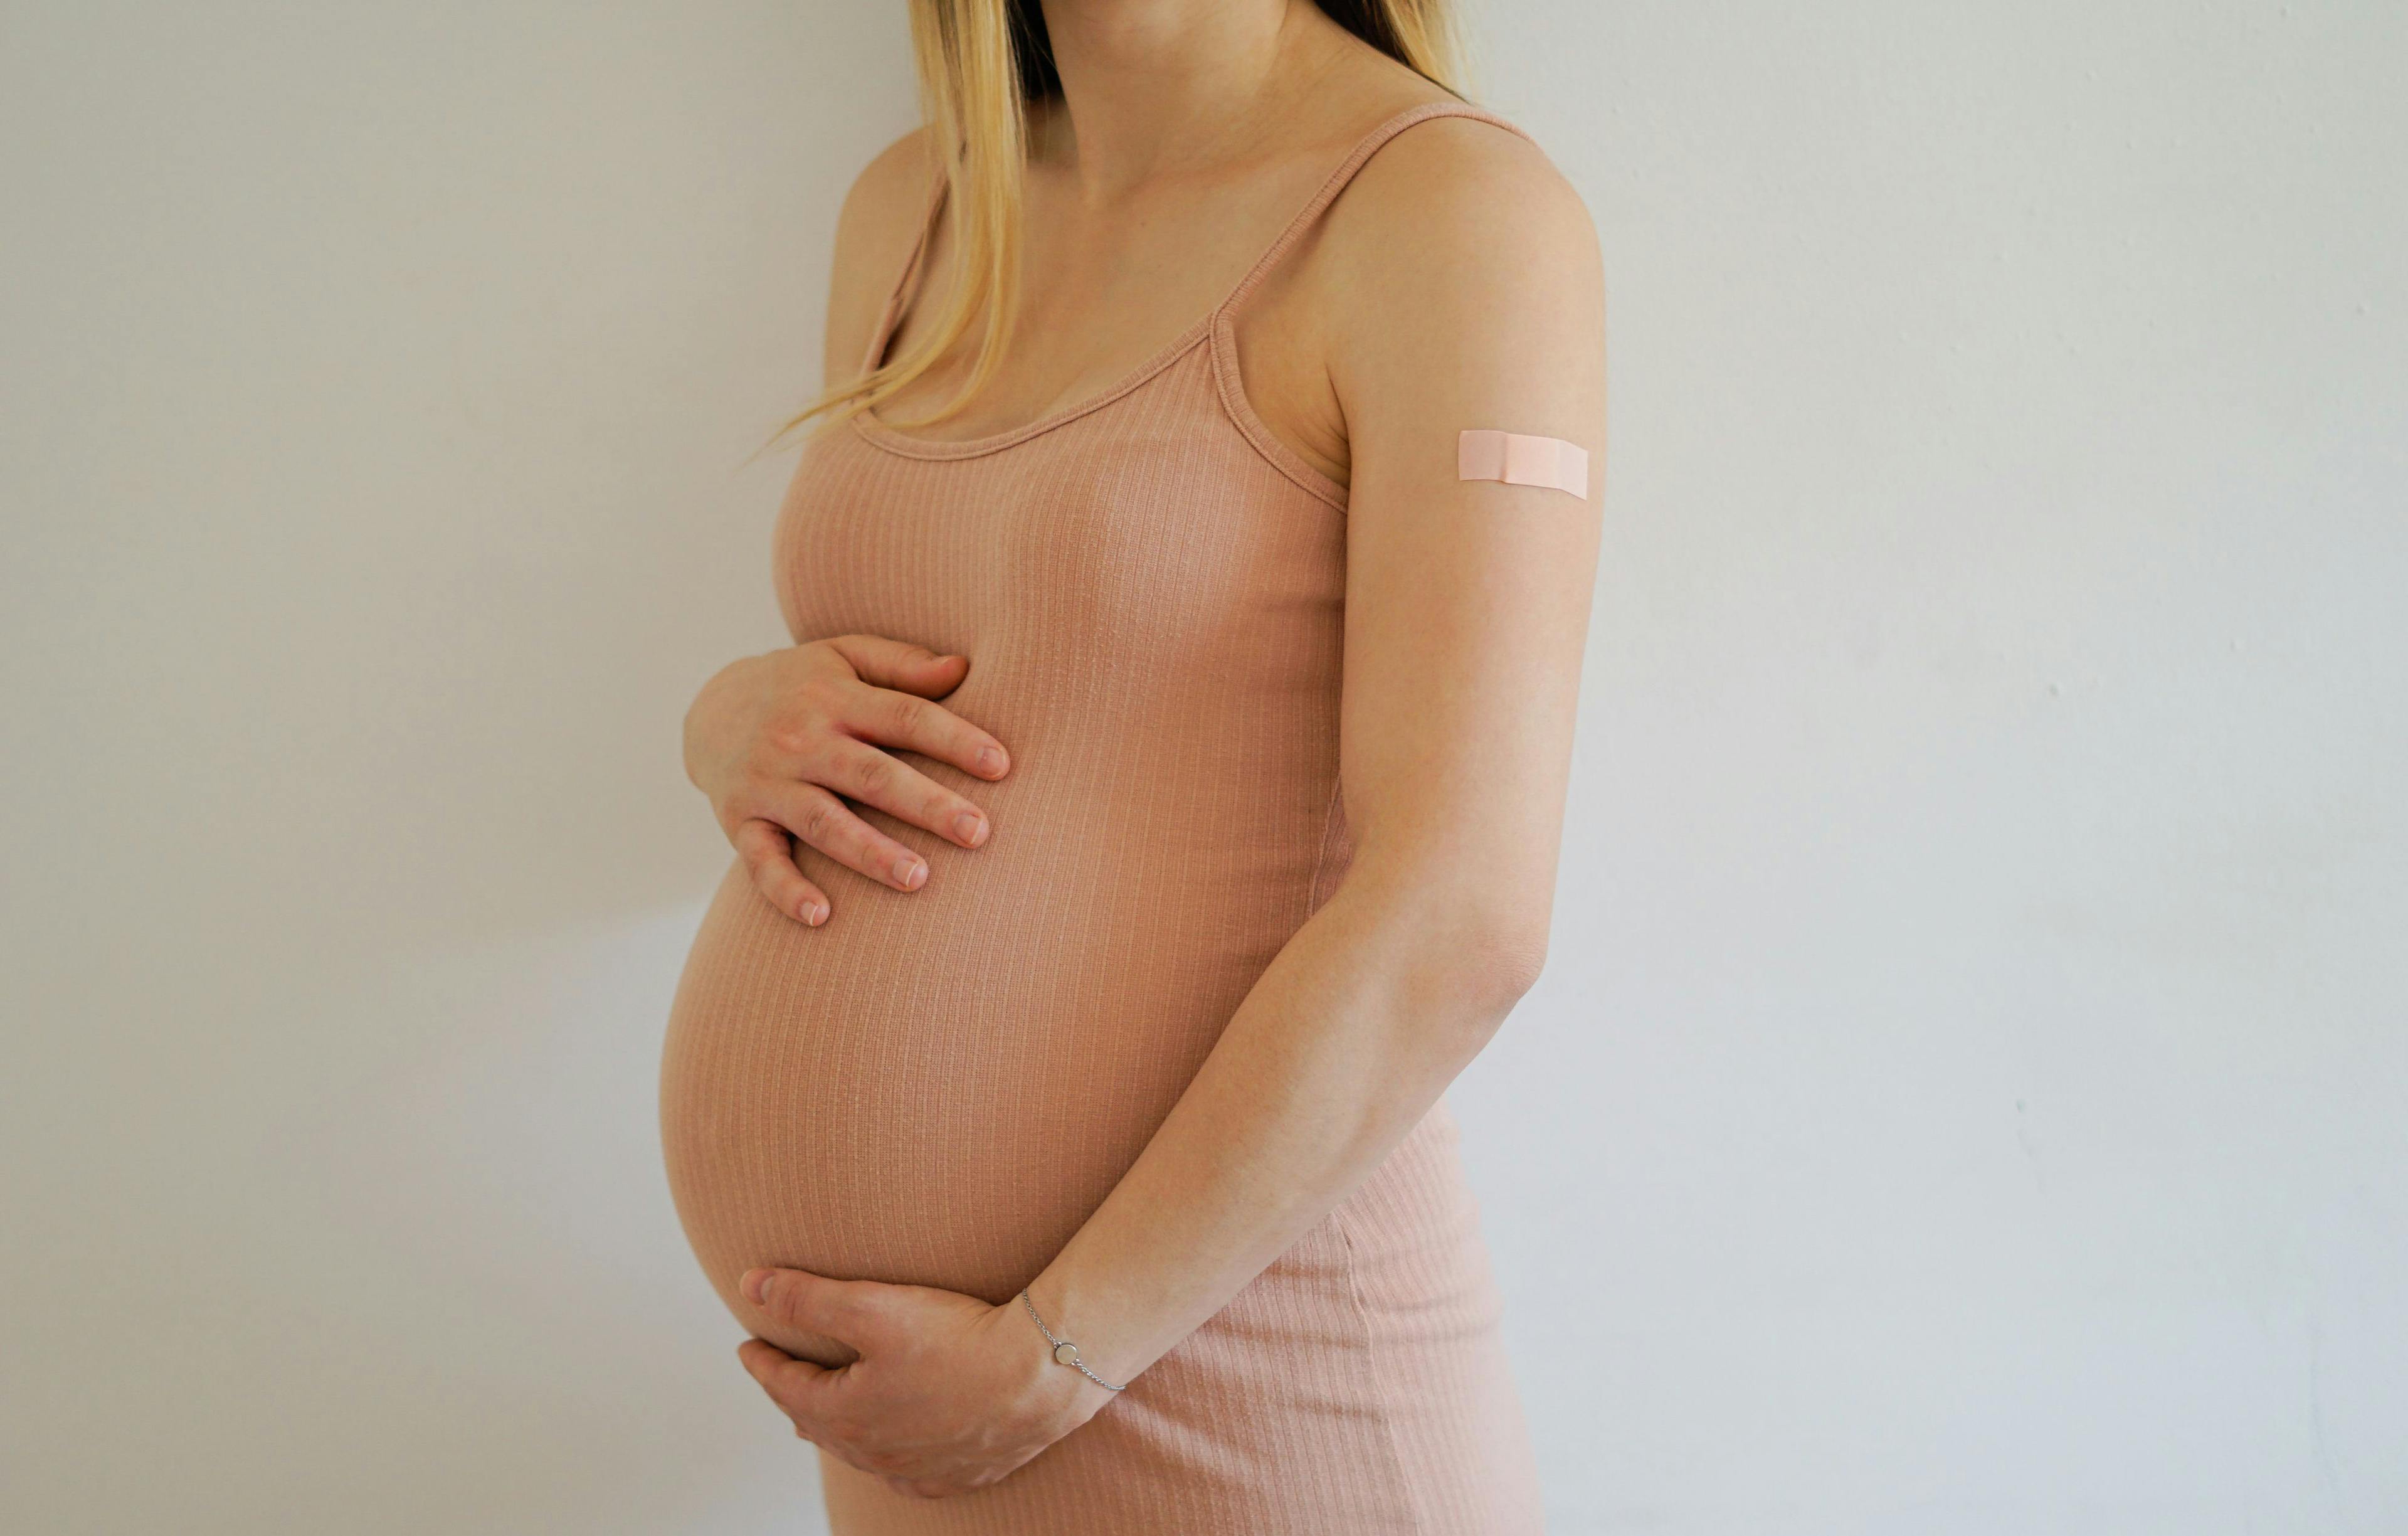 Infants of vaccinated mothers less likely to test positive for COVID-19